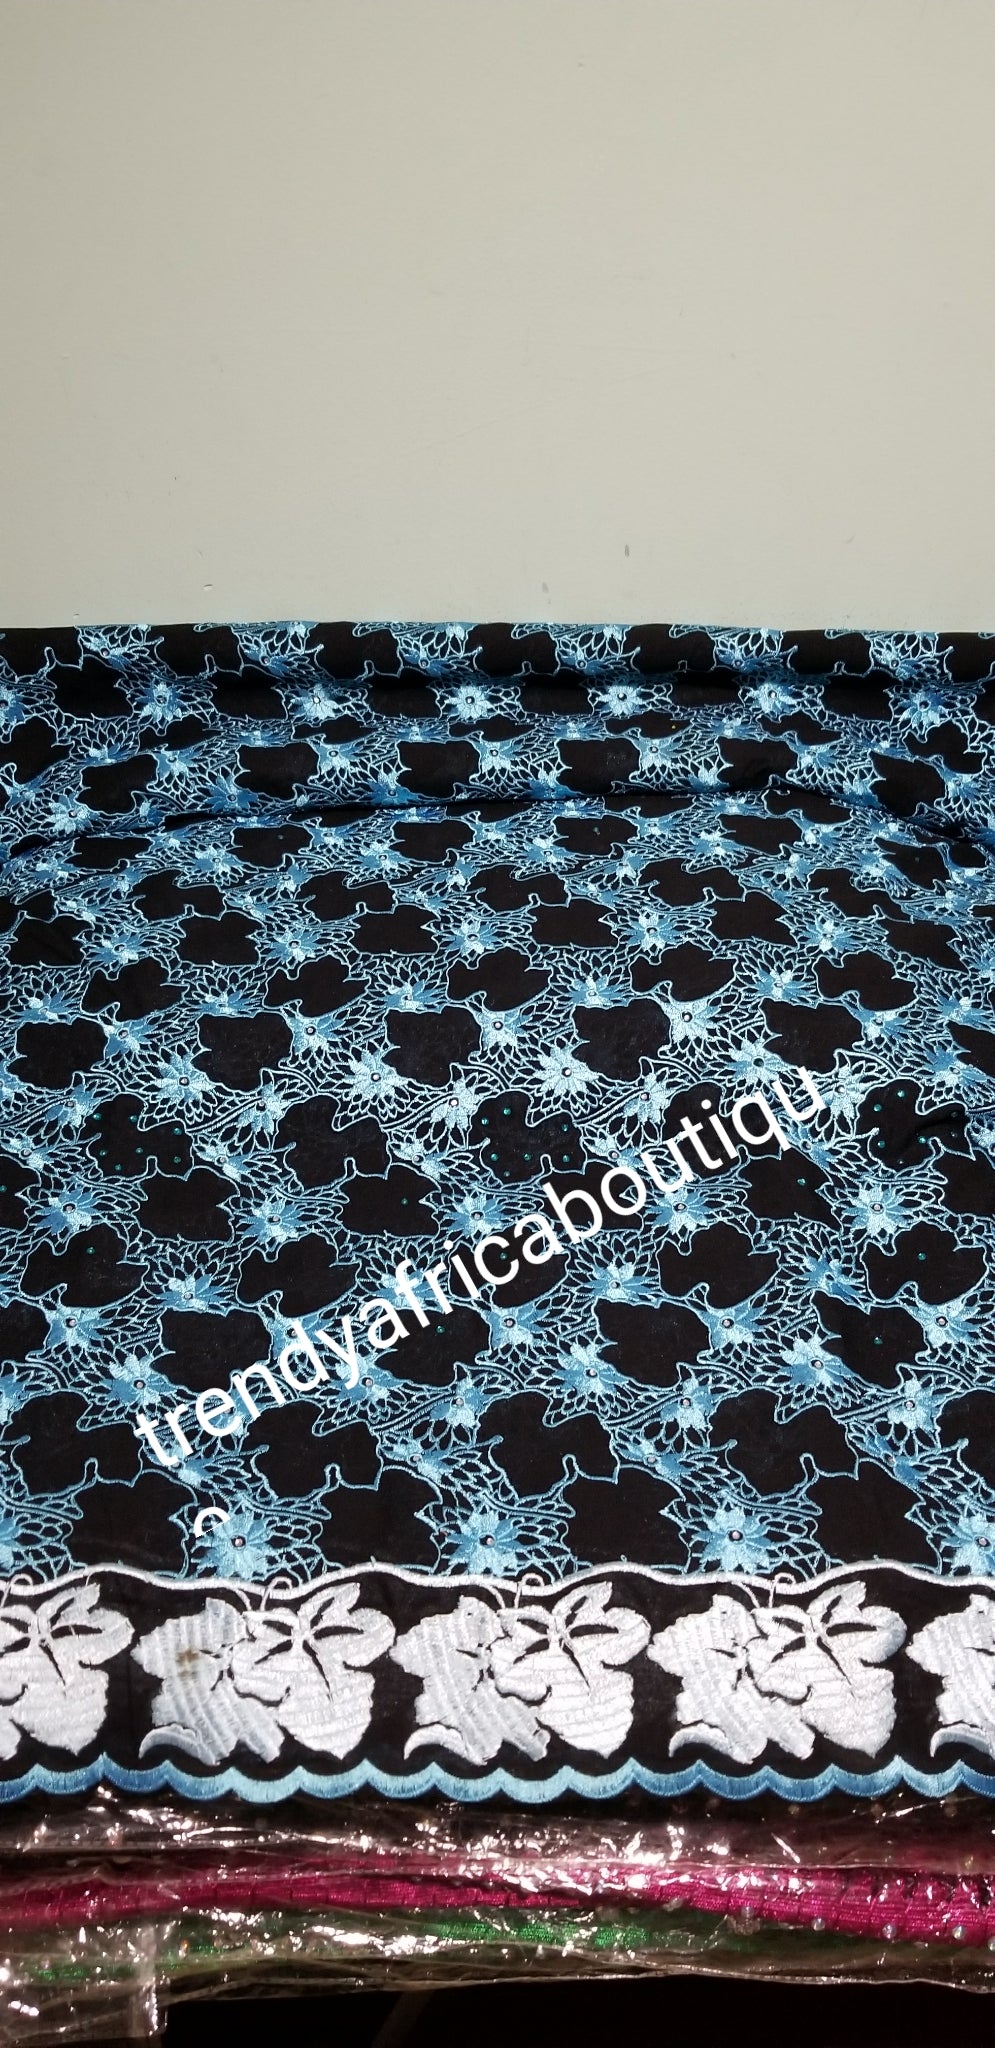 Sale sale: Quality Swiss Lace fabric. 100% Swiss cotton Voile fabric in black/turquoise blue embroidery and multi Crystal stones. Sold as 5yds lenght